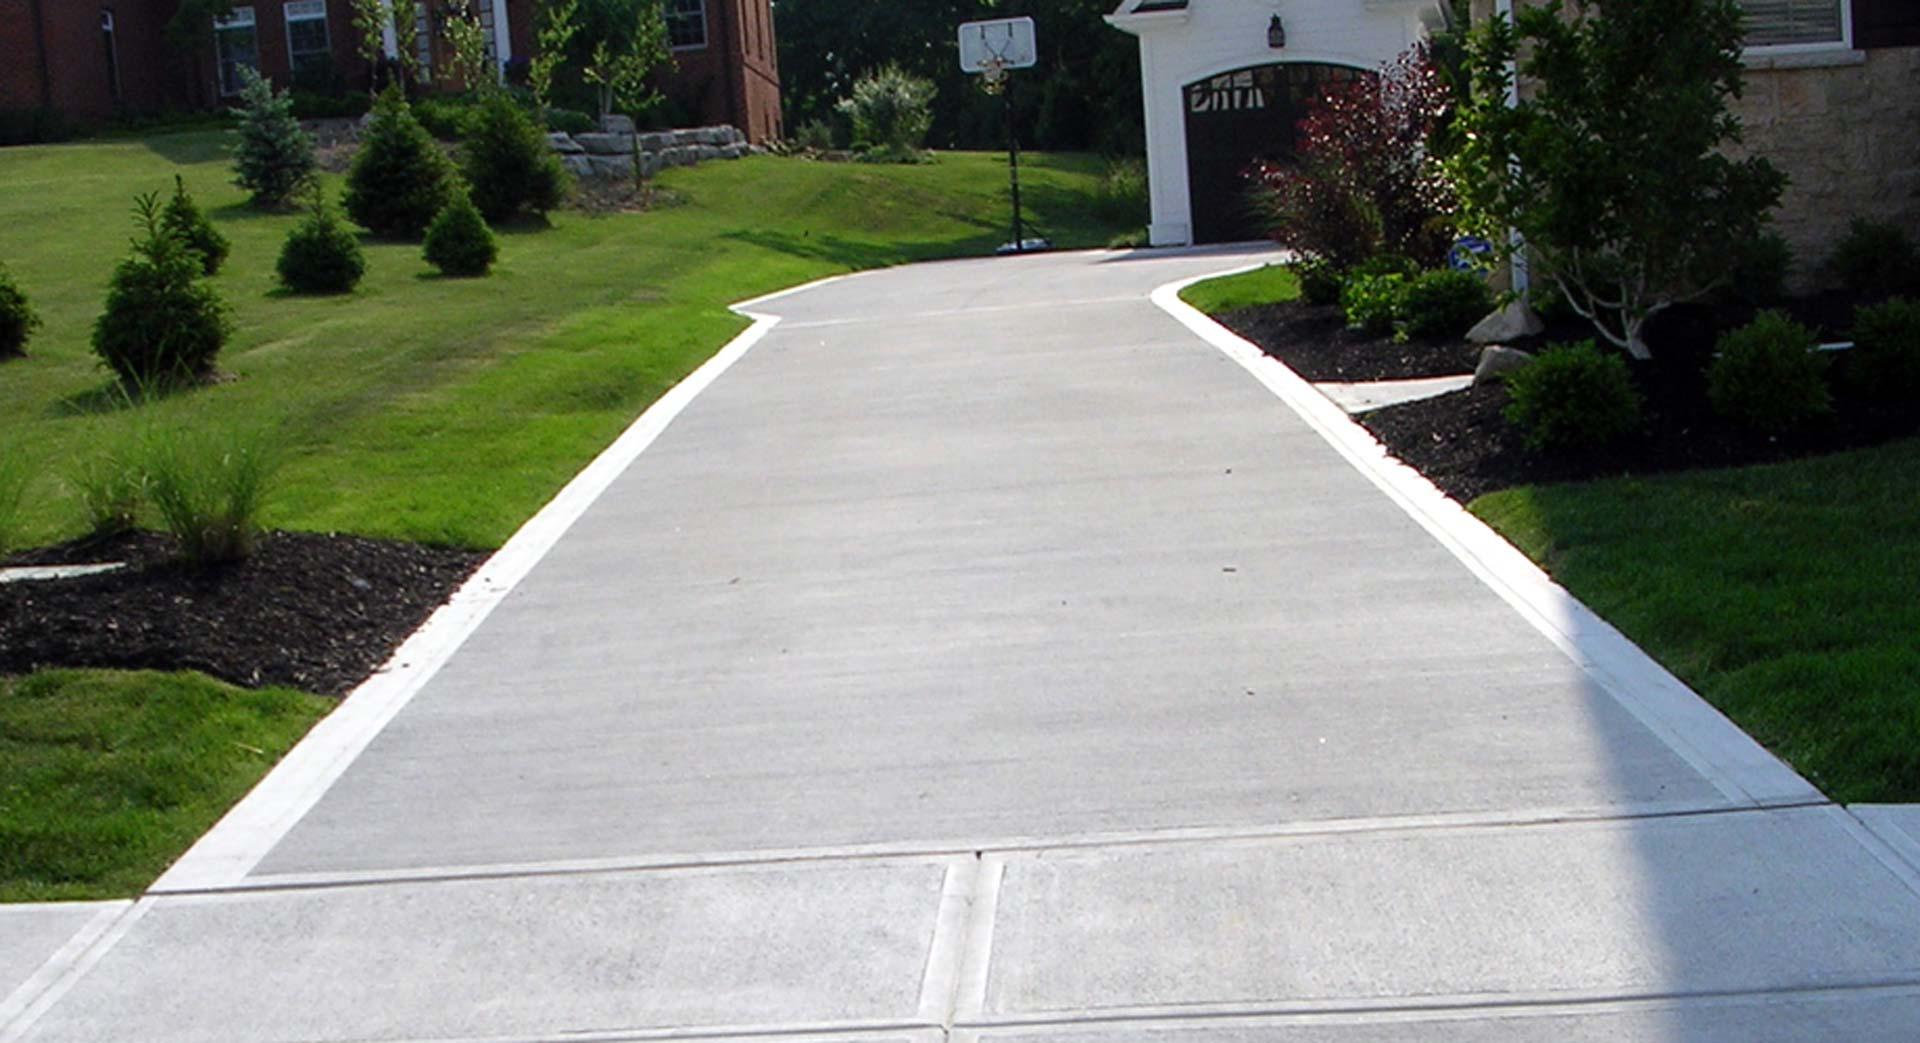 We can help you design an application that you’ll not only be proud of, but will add curb appeal and Custom Concrete Plus Dublin (740)549-2603